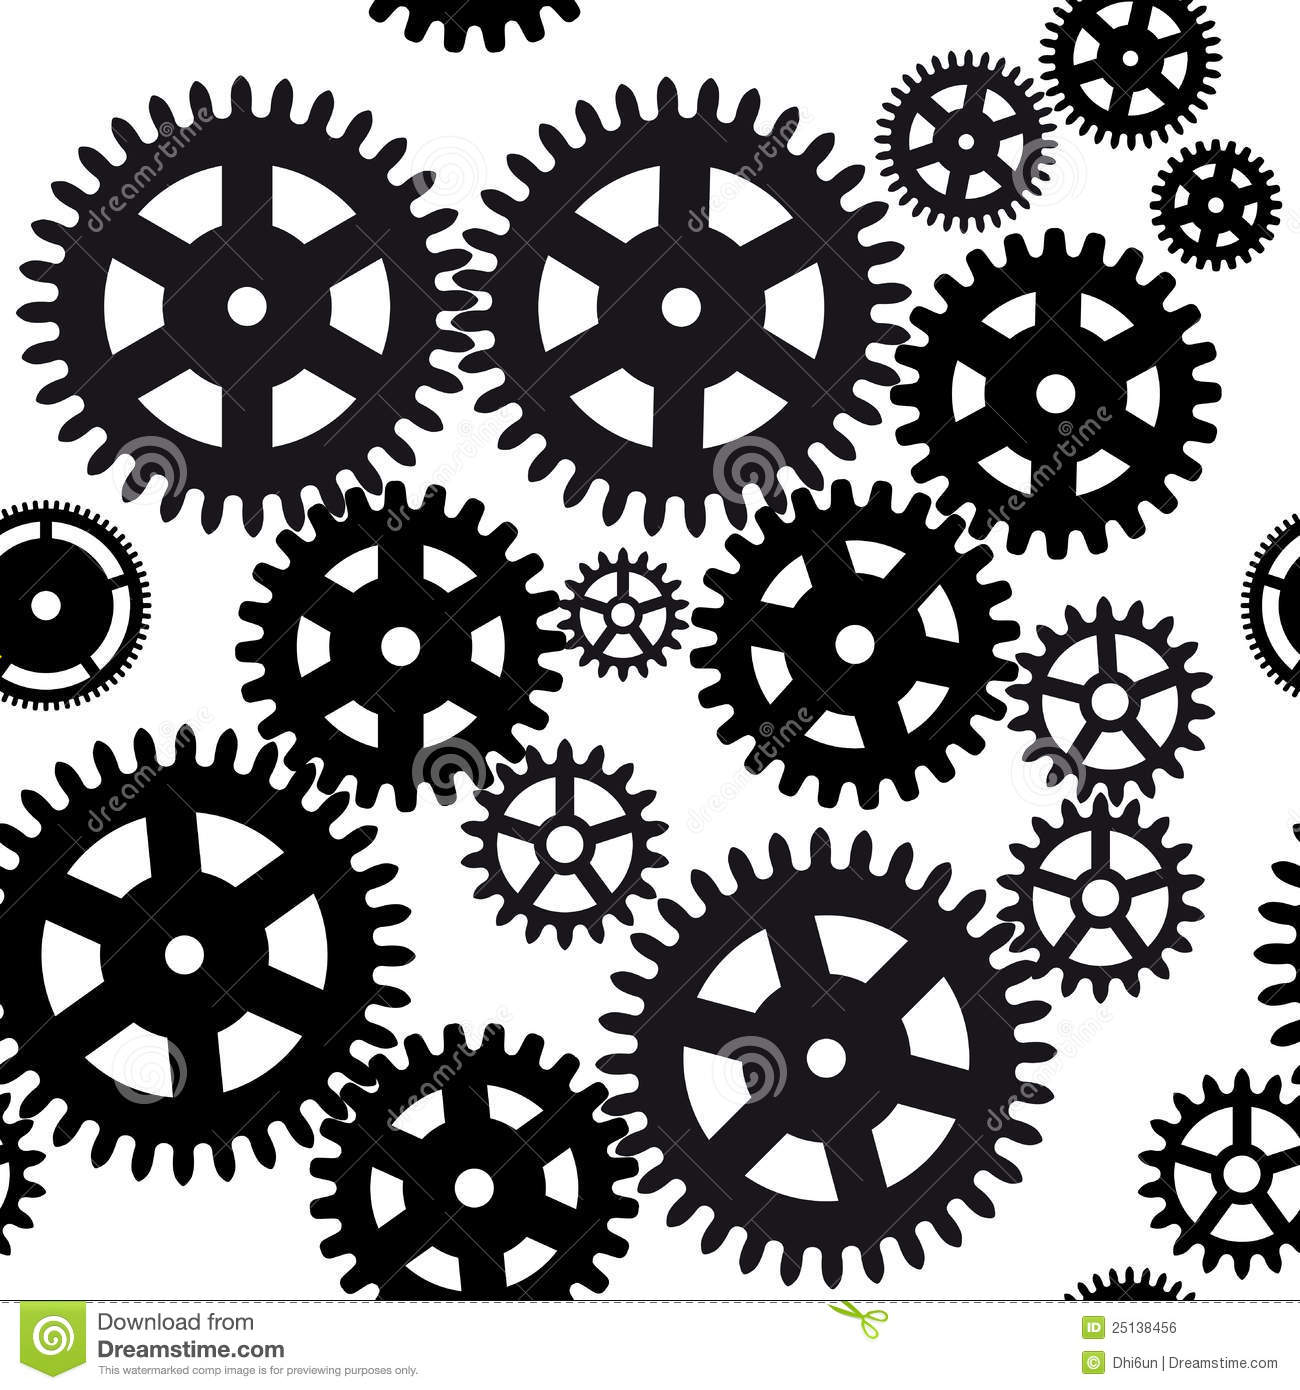 Seamless Gear And Cogwheel Background Royalty Free Stock Image   Image